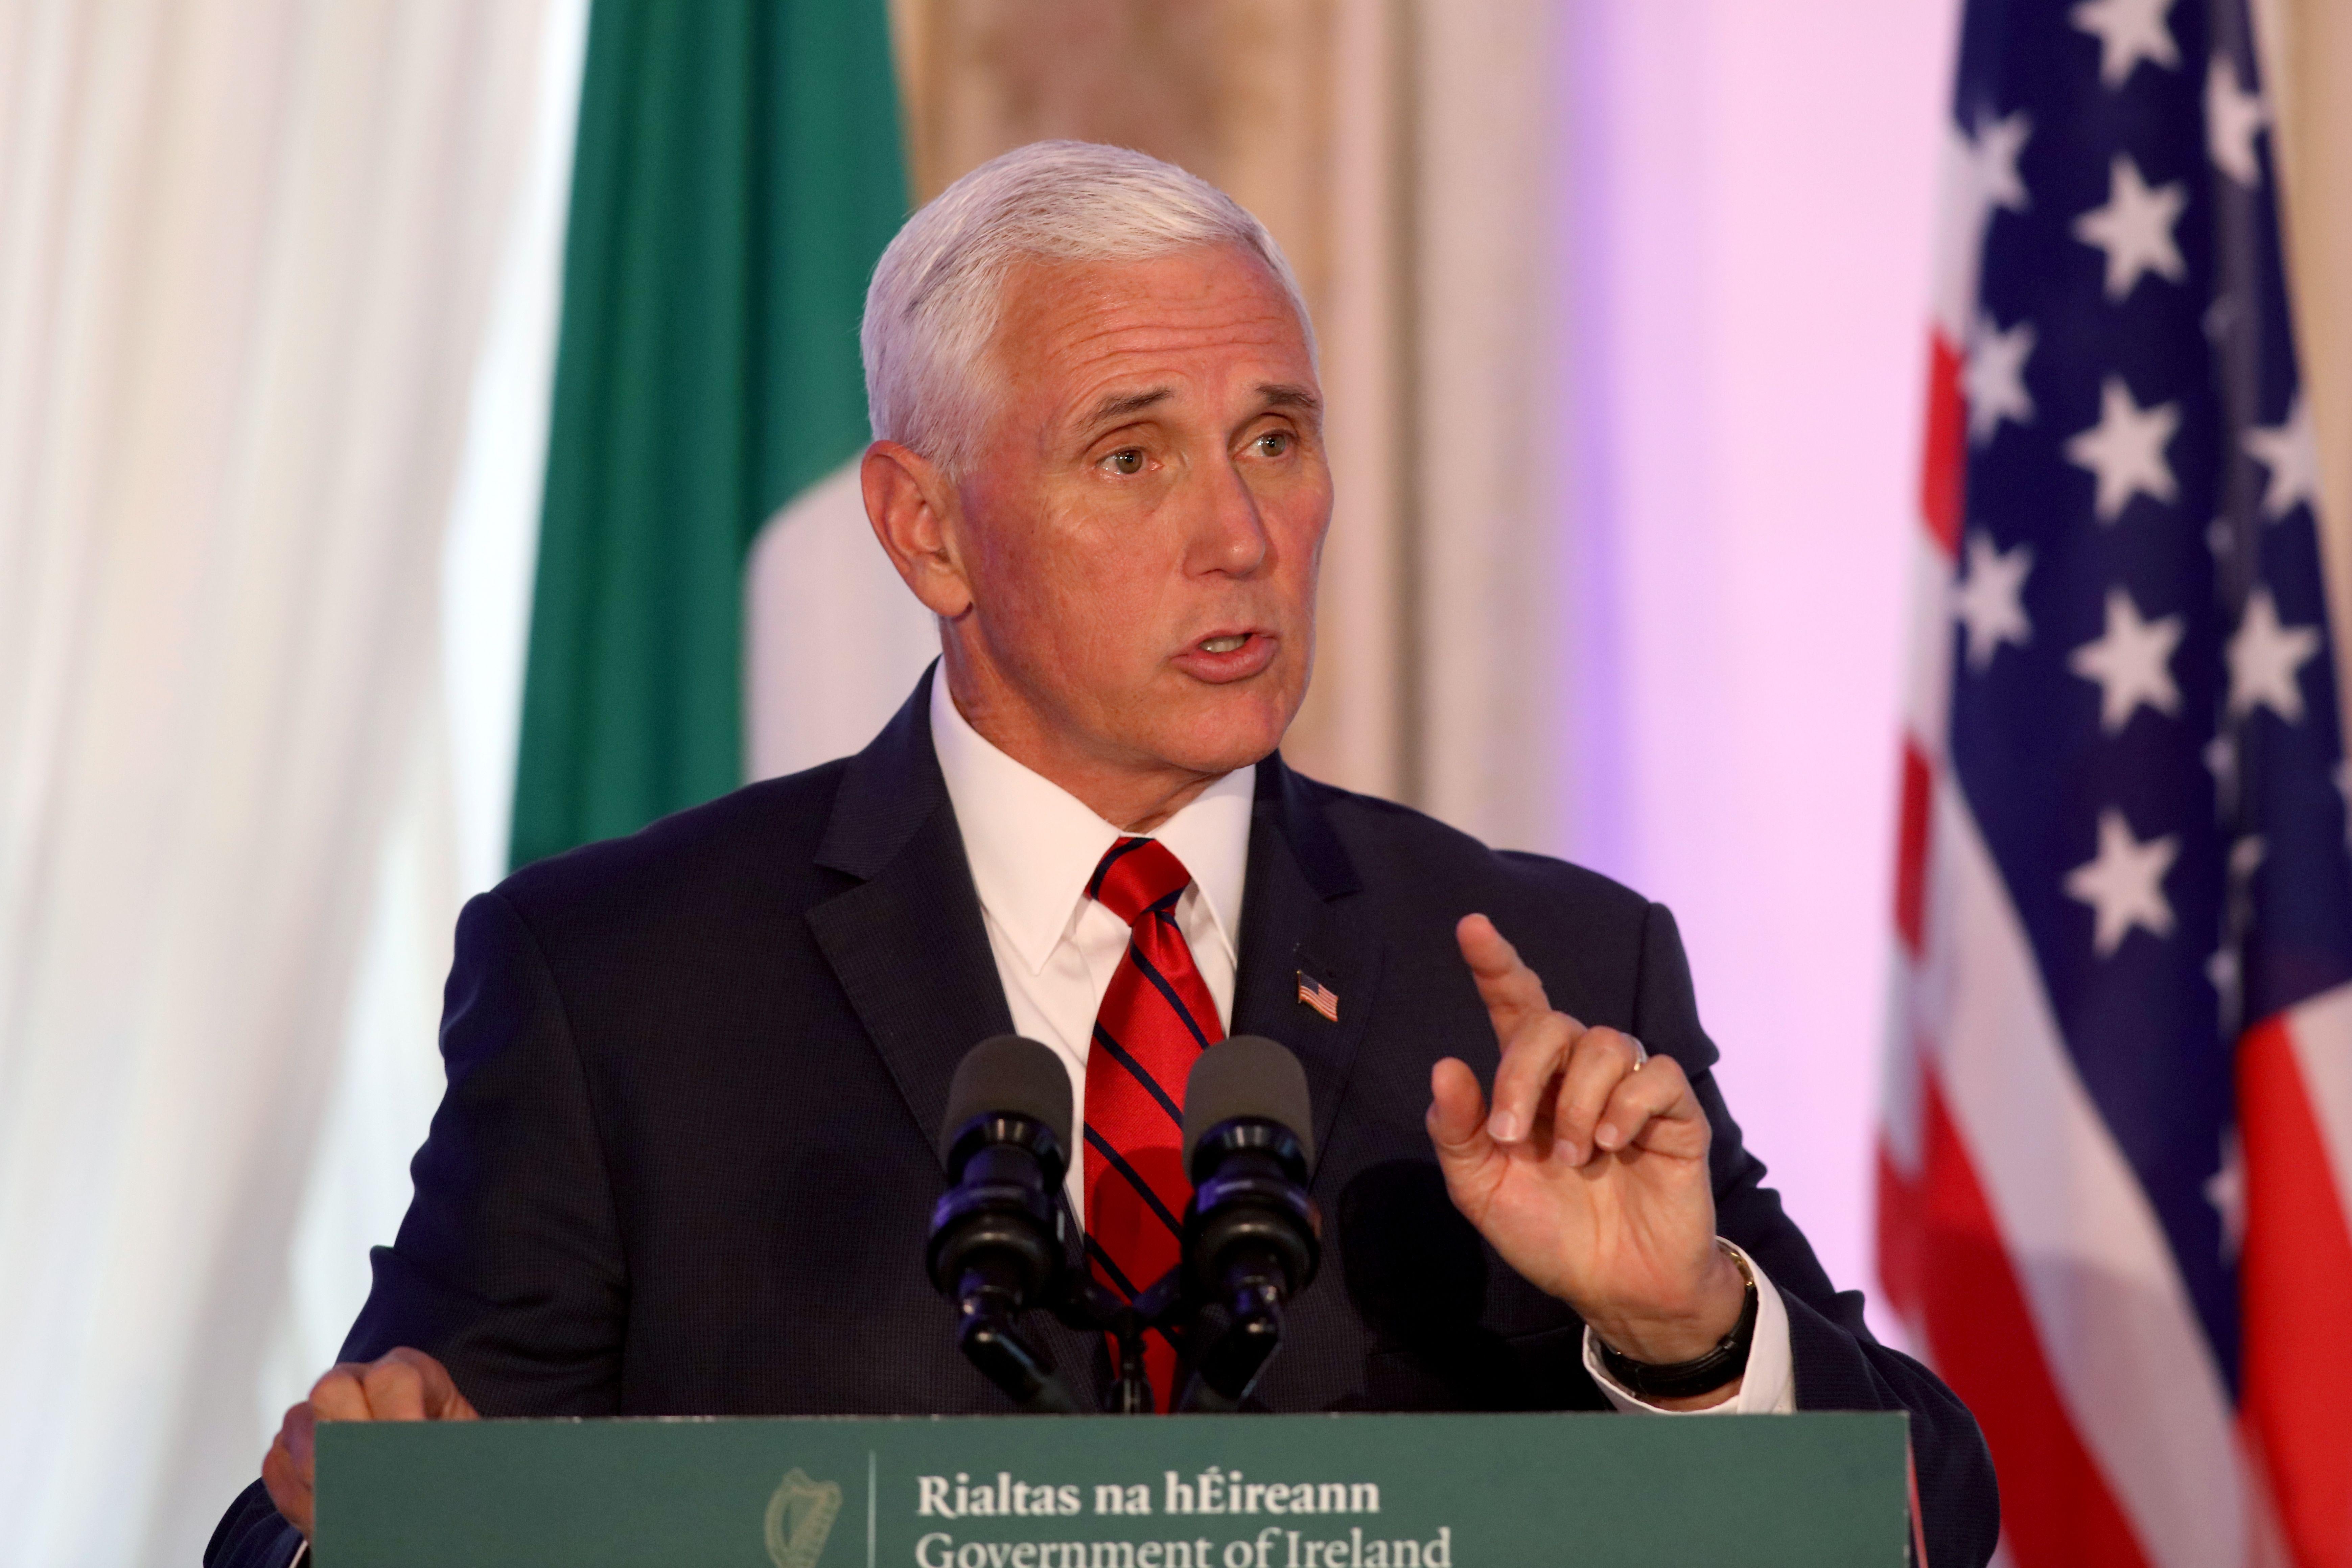 Vice President Mike Pence speaks while standing in front of Irish and American flags.